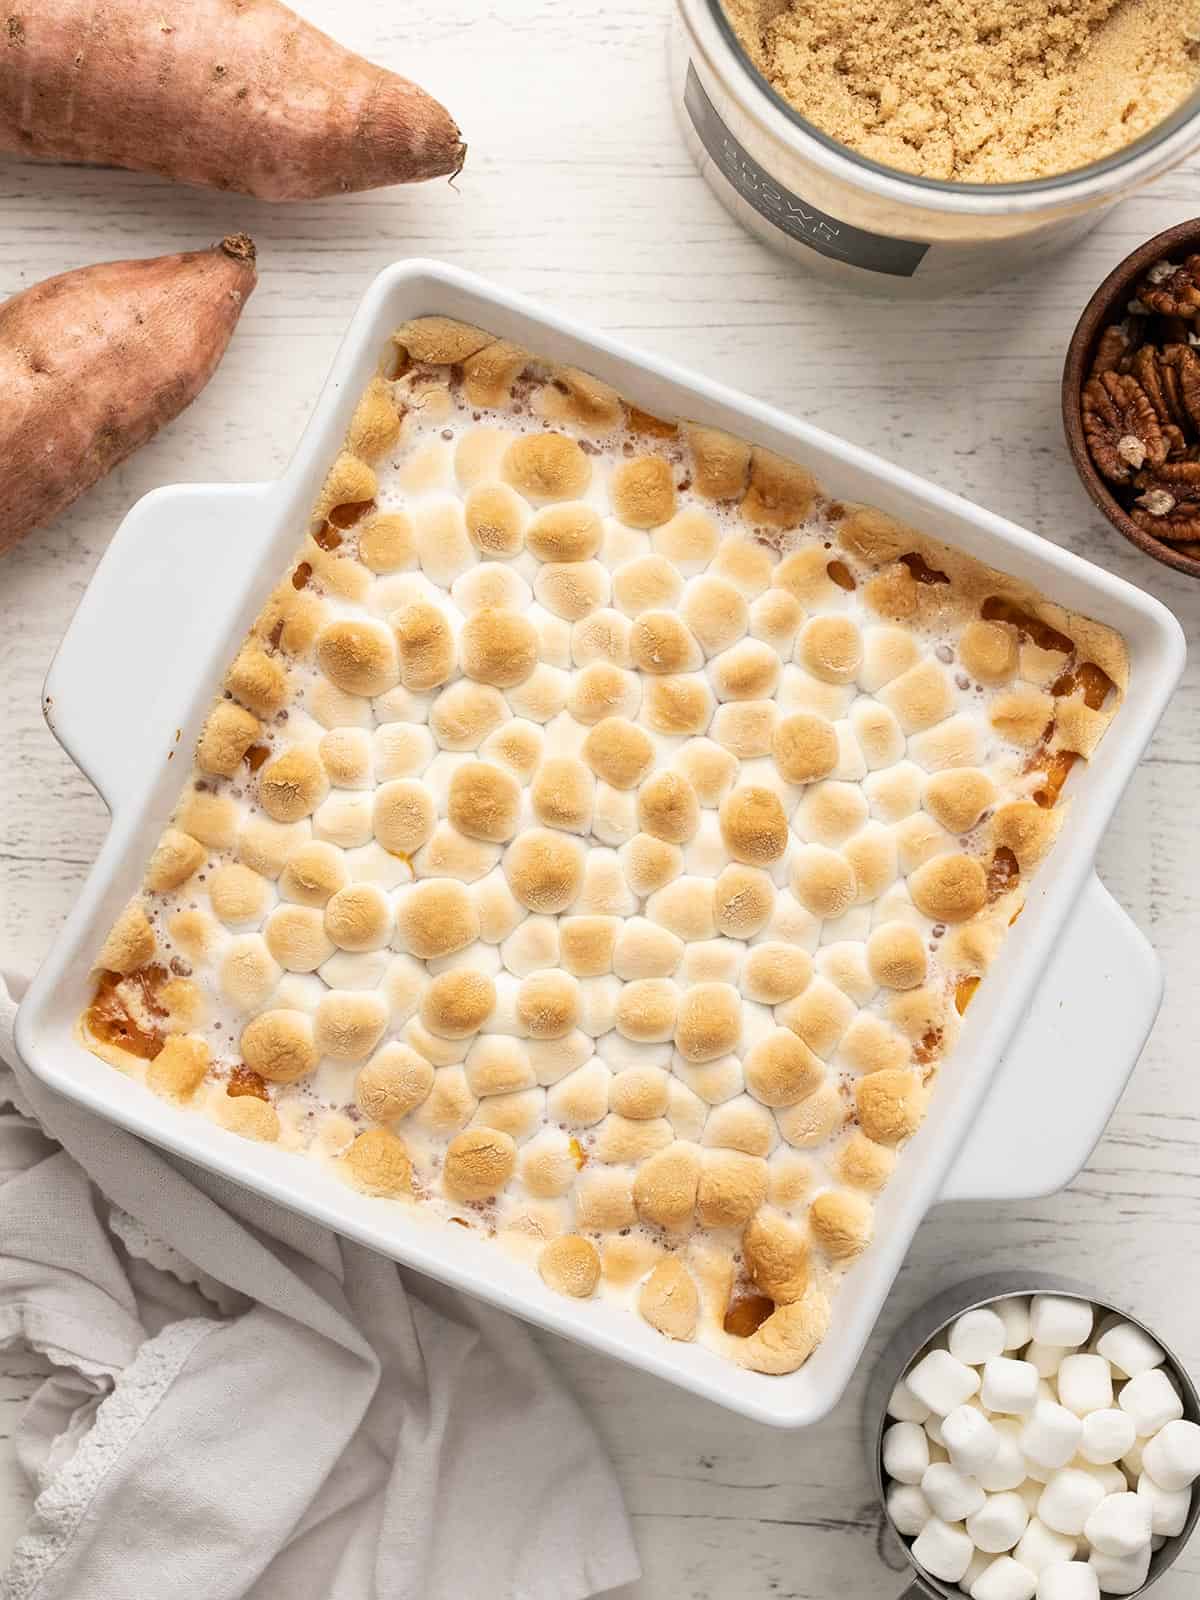 Overhead shot of sweet potato casserole topped with marshmallows in a white casserole dish.